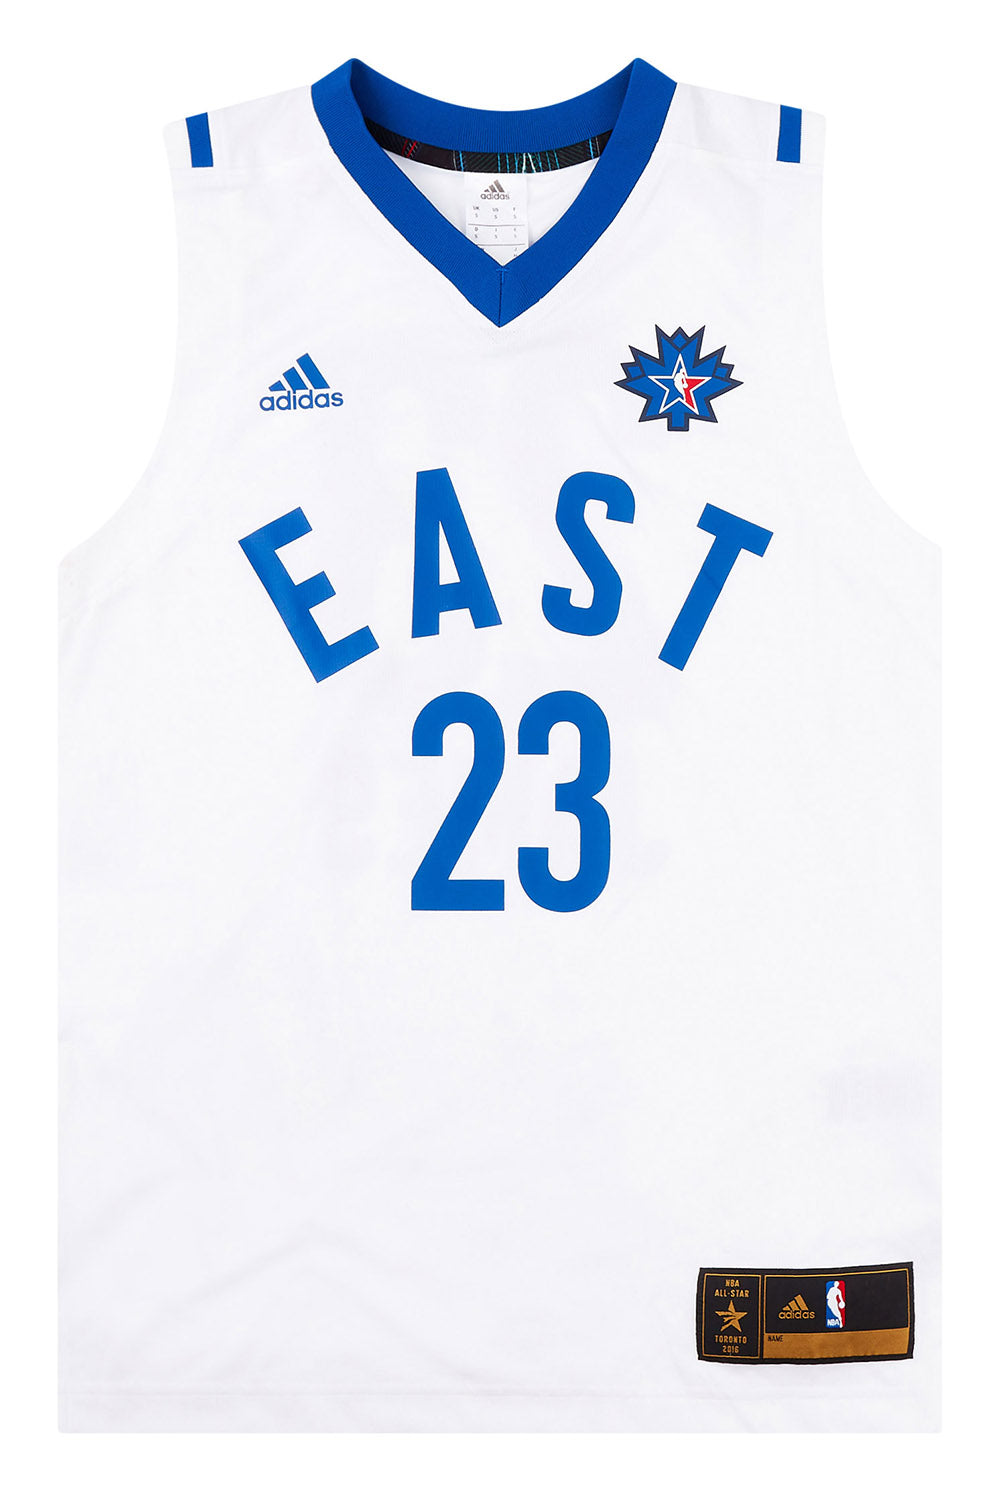 2016 NBA ALL-STAR JAMES #23 ADIDAS JERSEY S - Classic American Sports